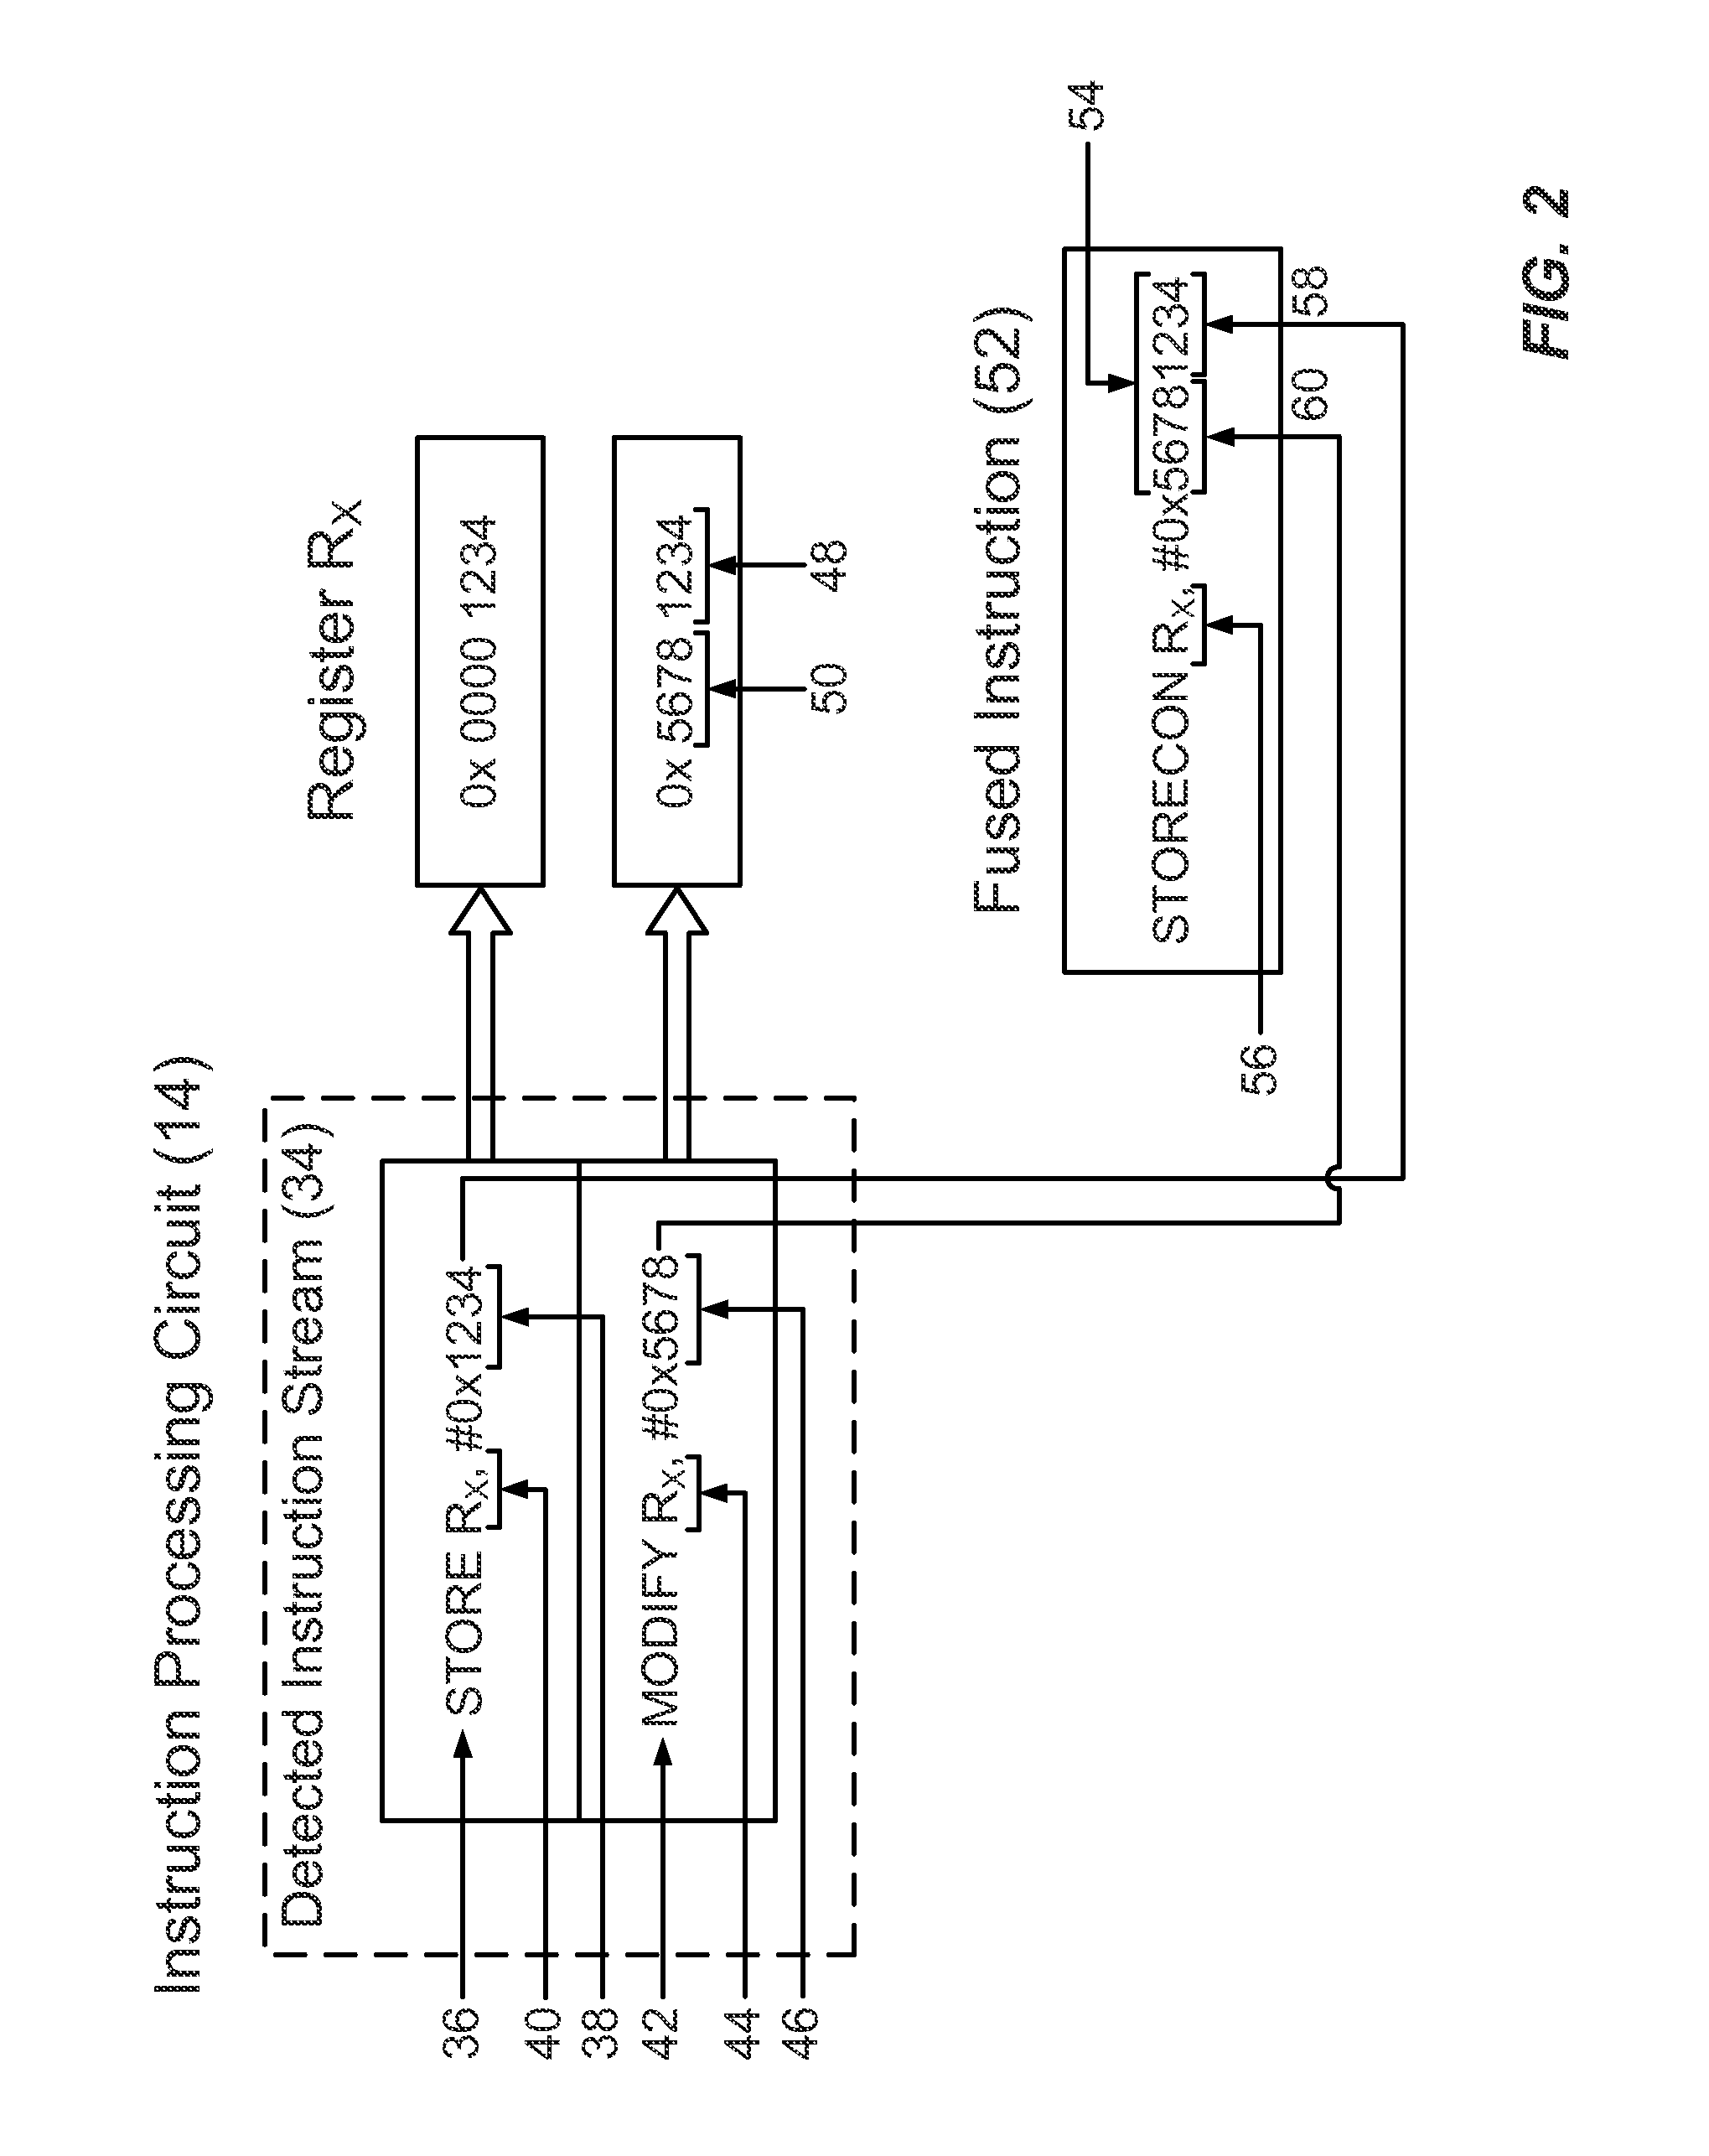 Fusing Immediate Value, Write-Based Instructions in Instruction Processing Circuits, and Related Processor Systems, Methods, and Computer-Readable Media